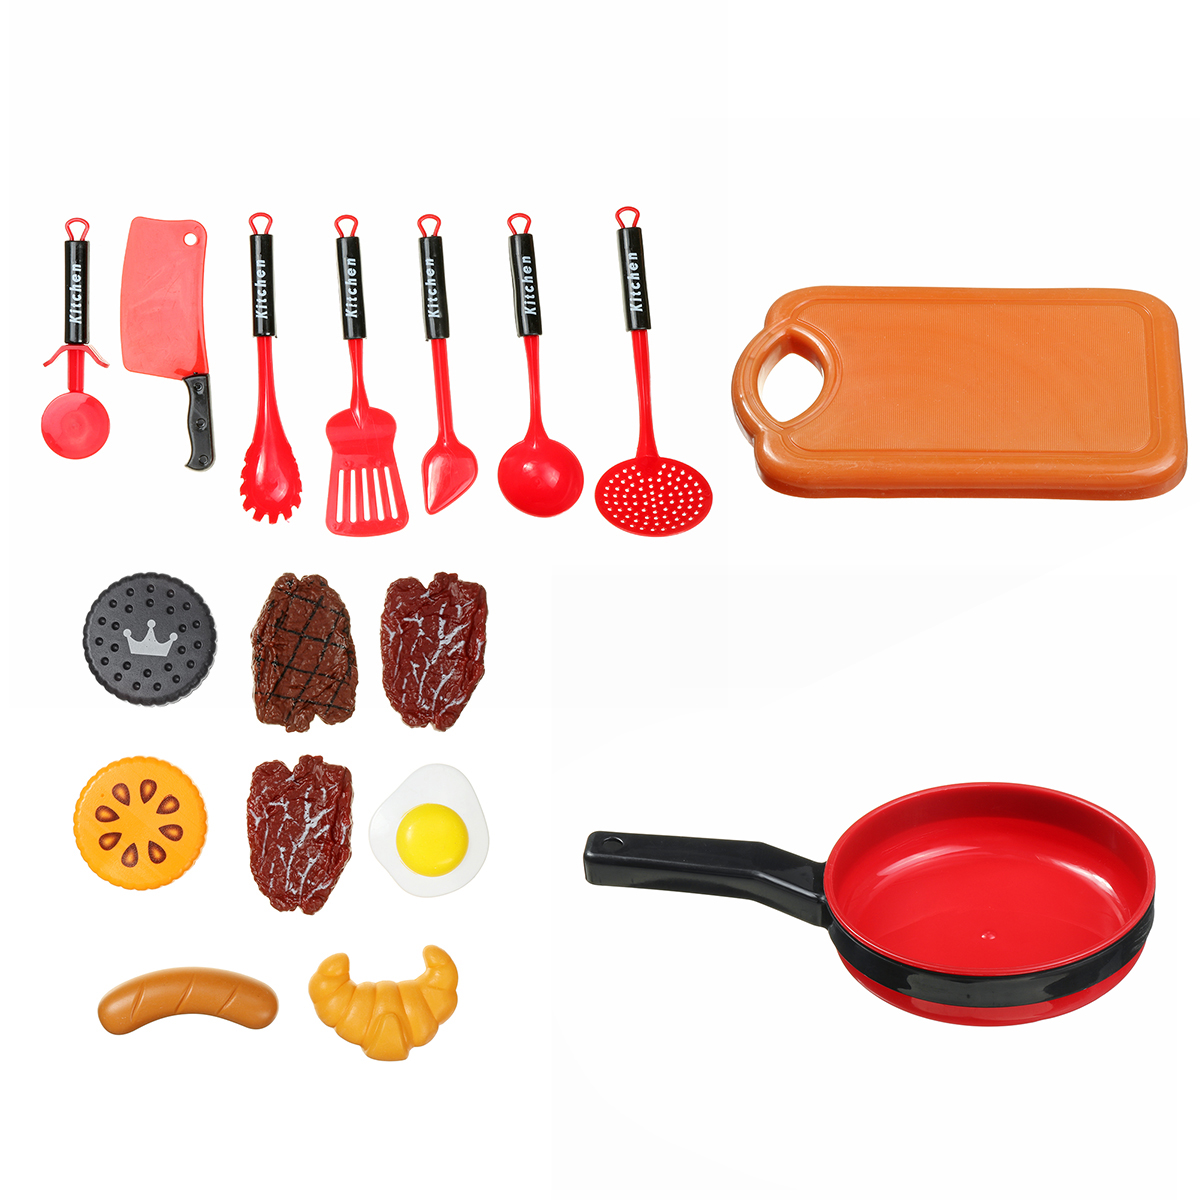 1636-Pcs-Kid-Play-House-Toy-ABS-Plastic-Kitchen-Cooking-Pots-Pans-Food-Dishes-Cookware-Toys-1627711-5